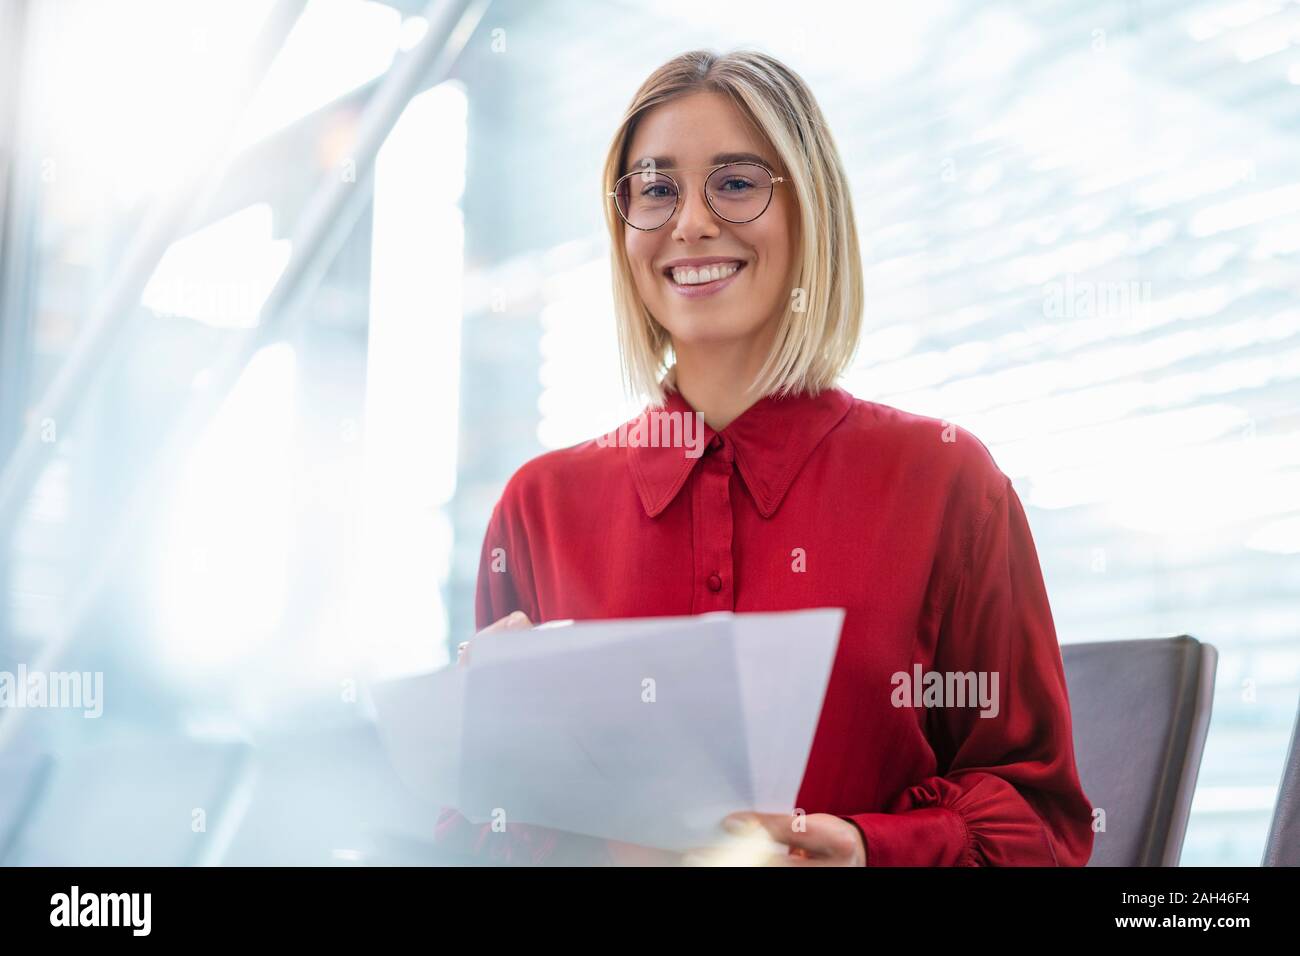 Portrait of smiling young businesswoman with papers sitting in waiting area Stock Photo